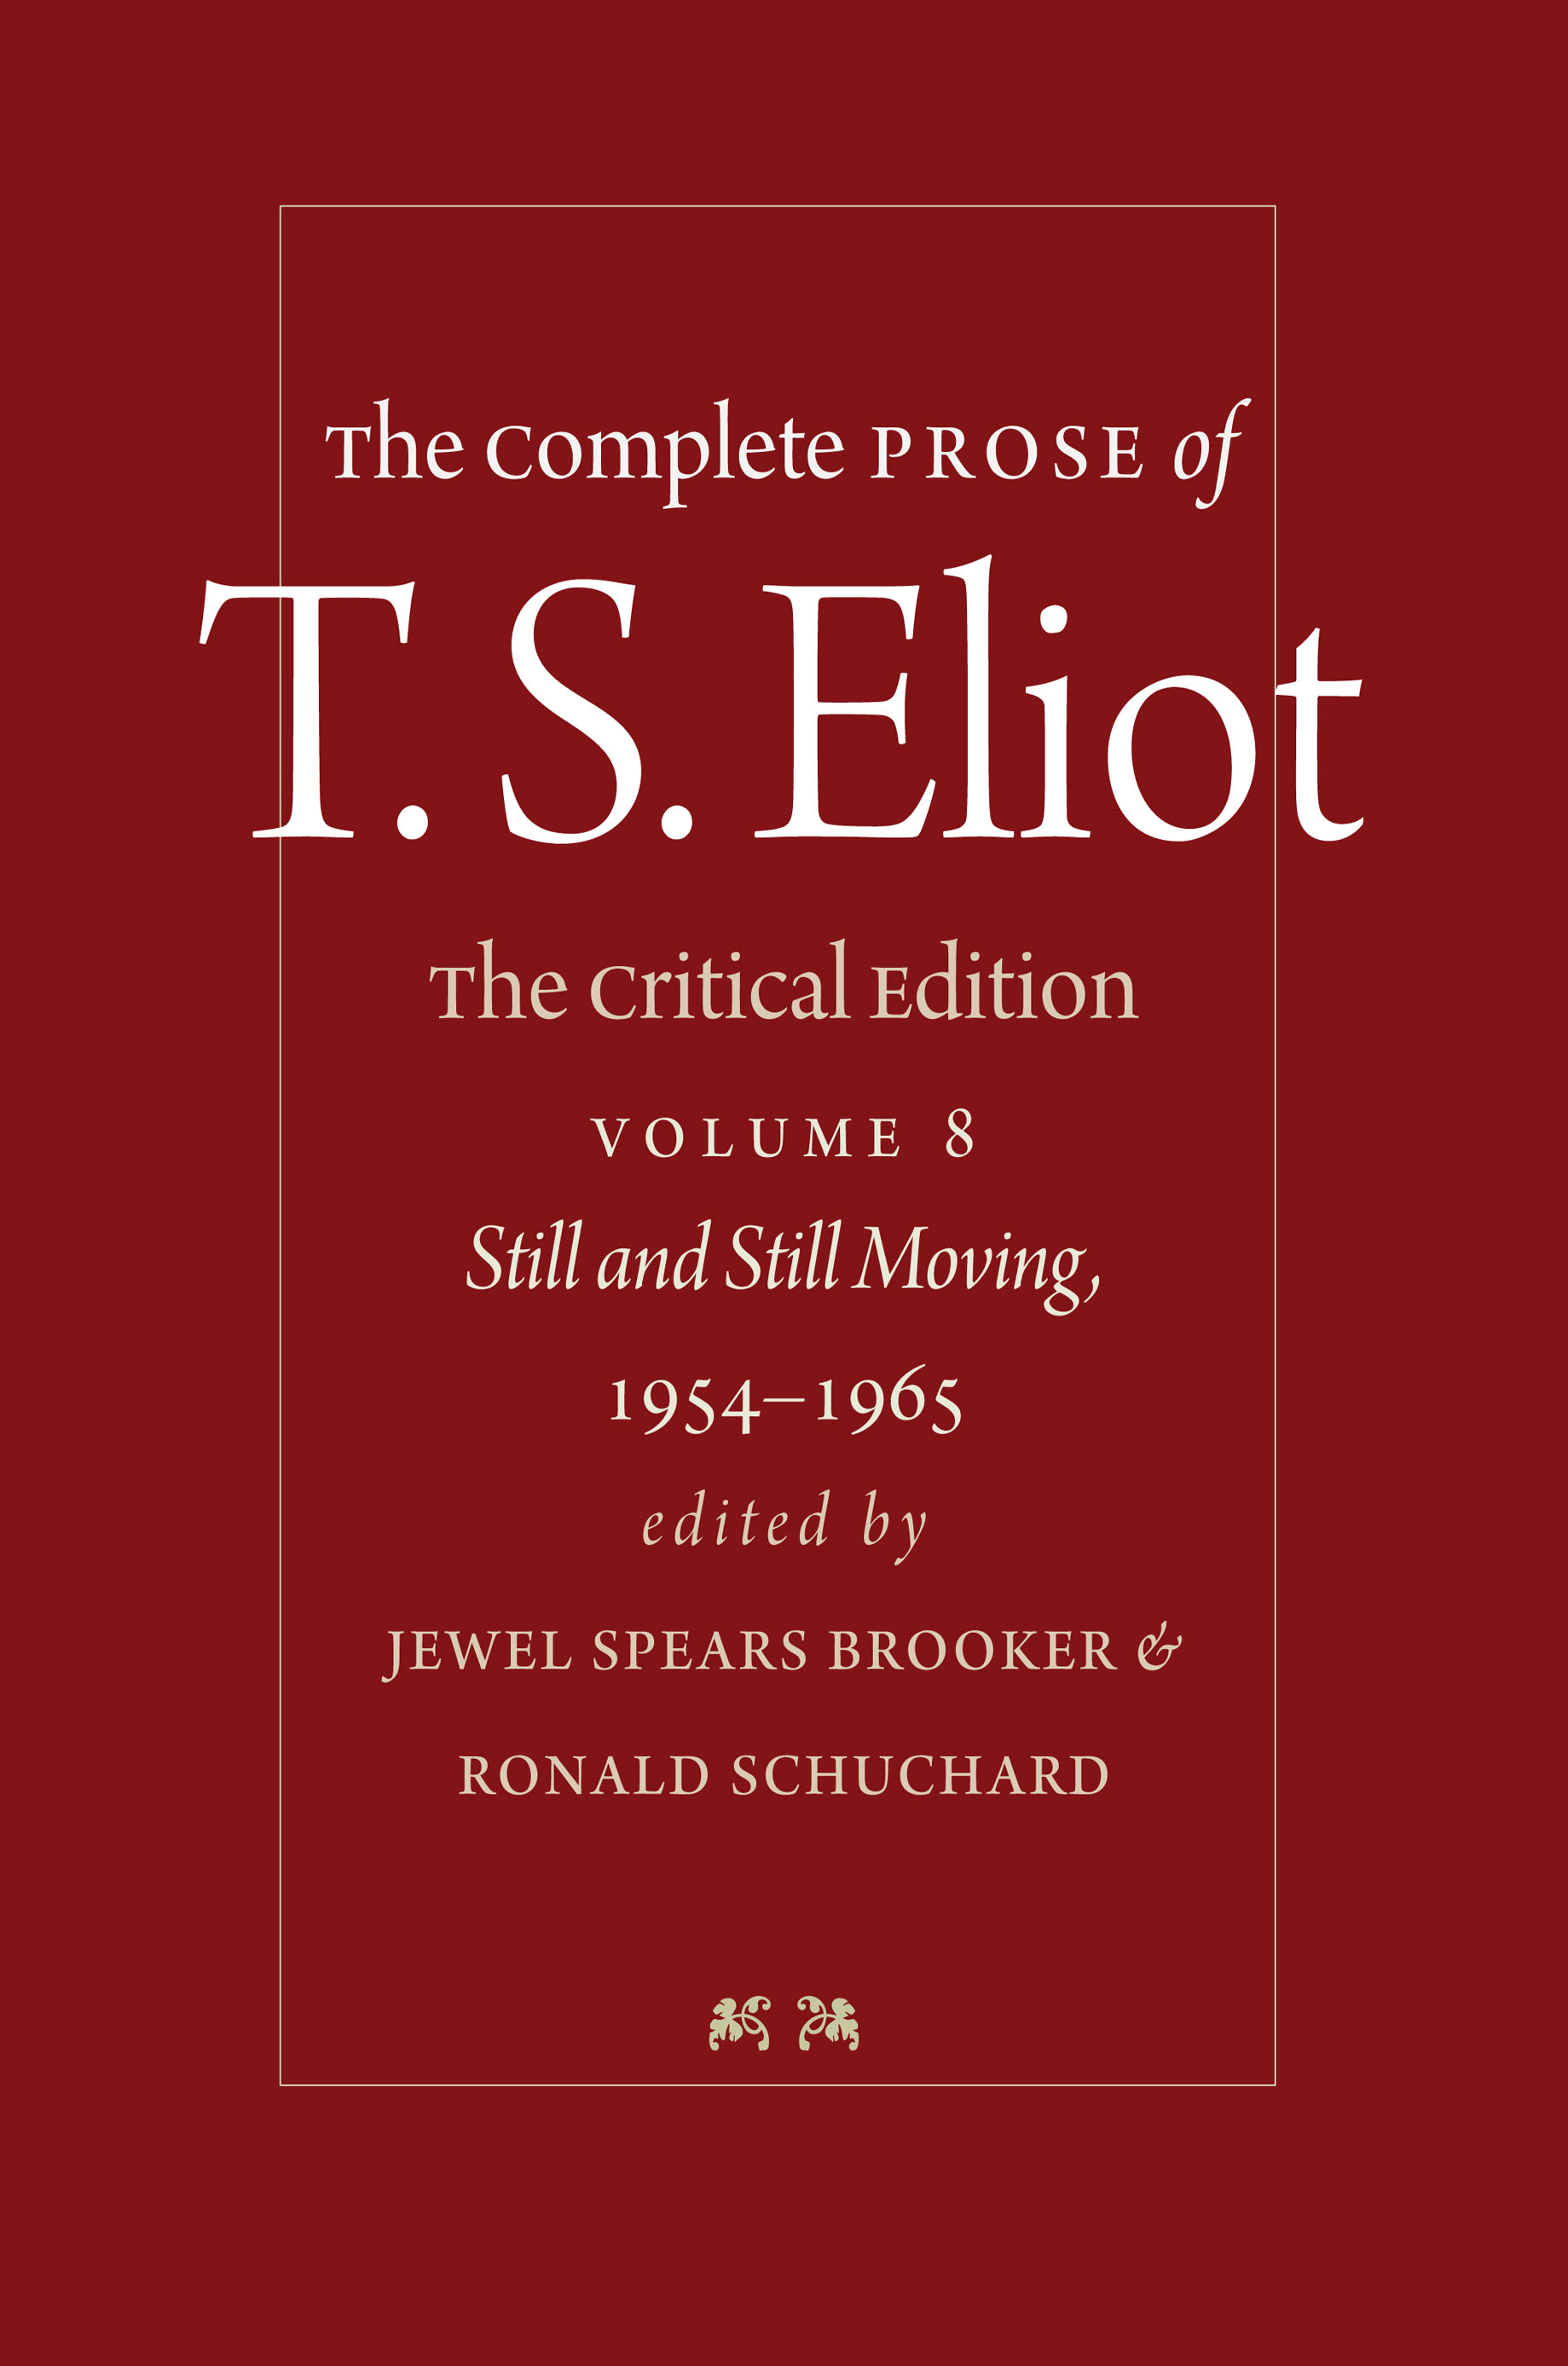 The Complete Prose of T. S. Eliot: The Critical Edition volume 8 cover